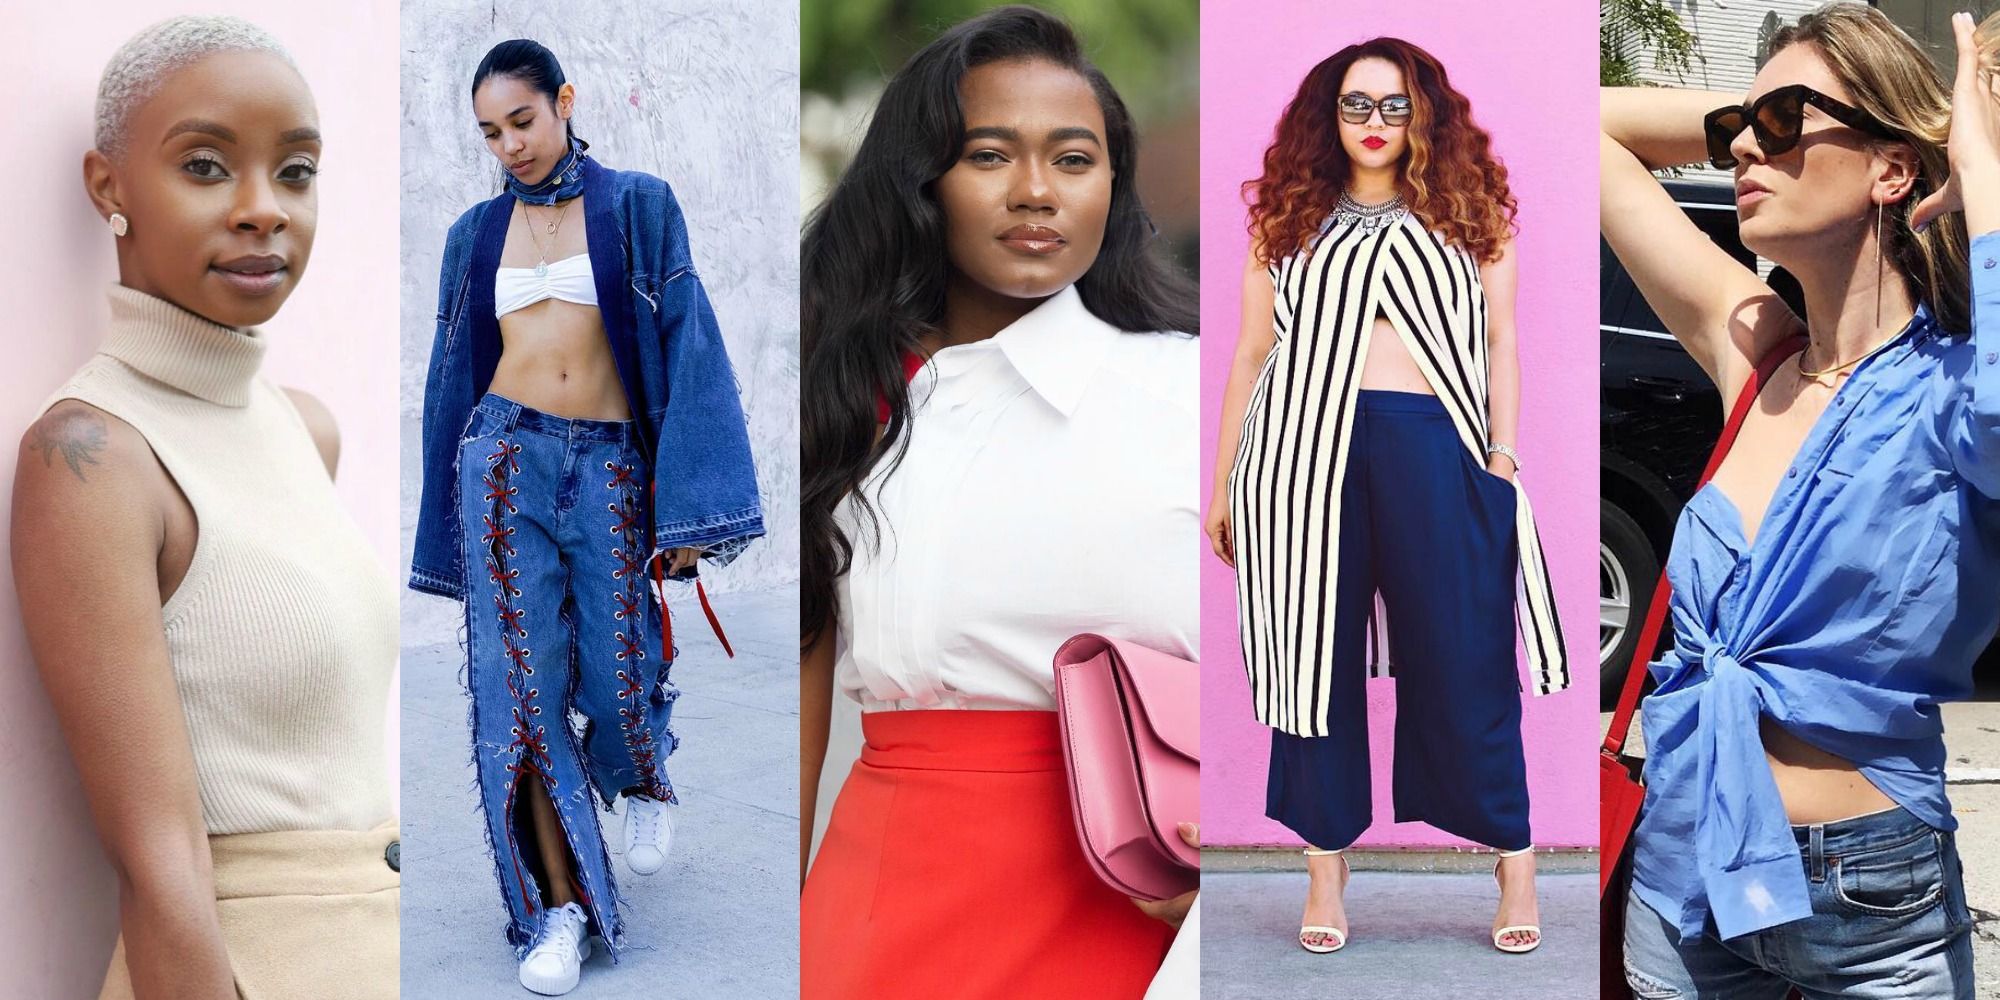 The Best Fashion Bloggers in Every Age Group